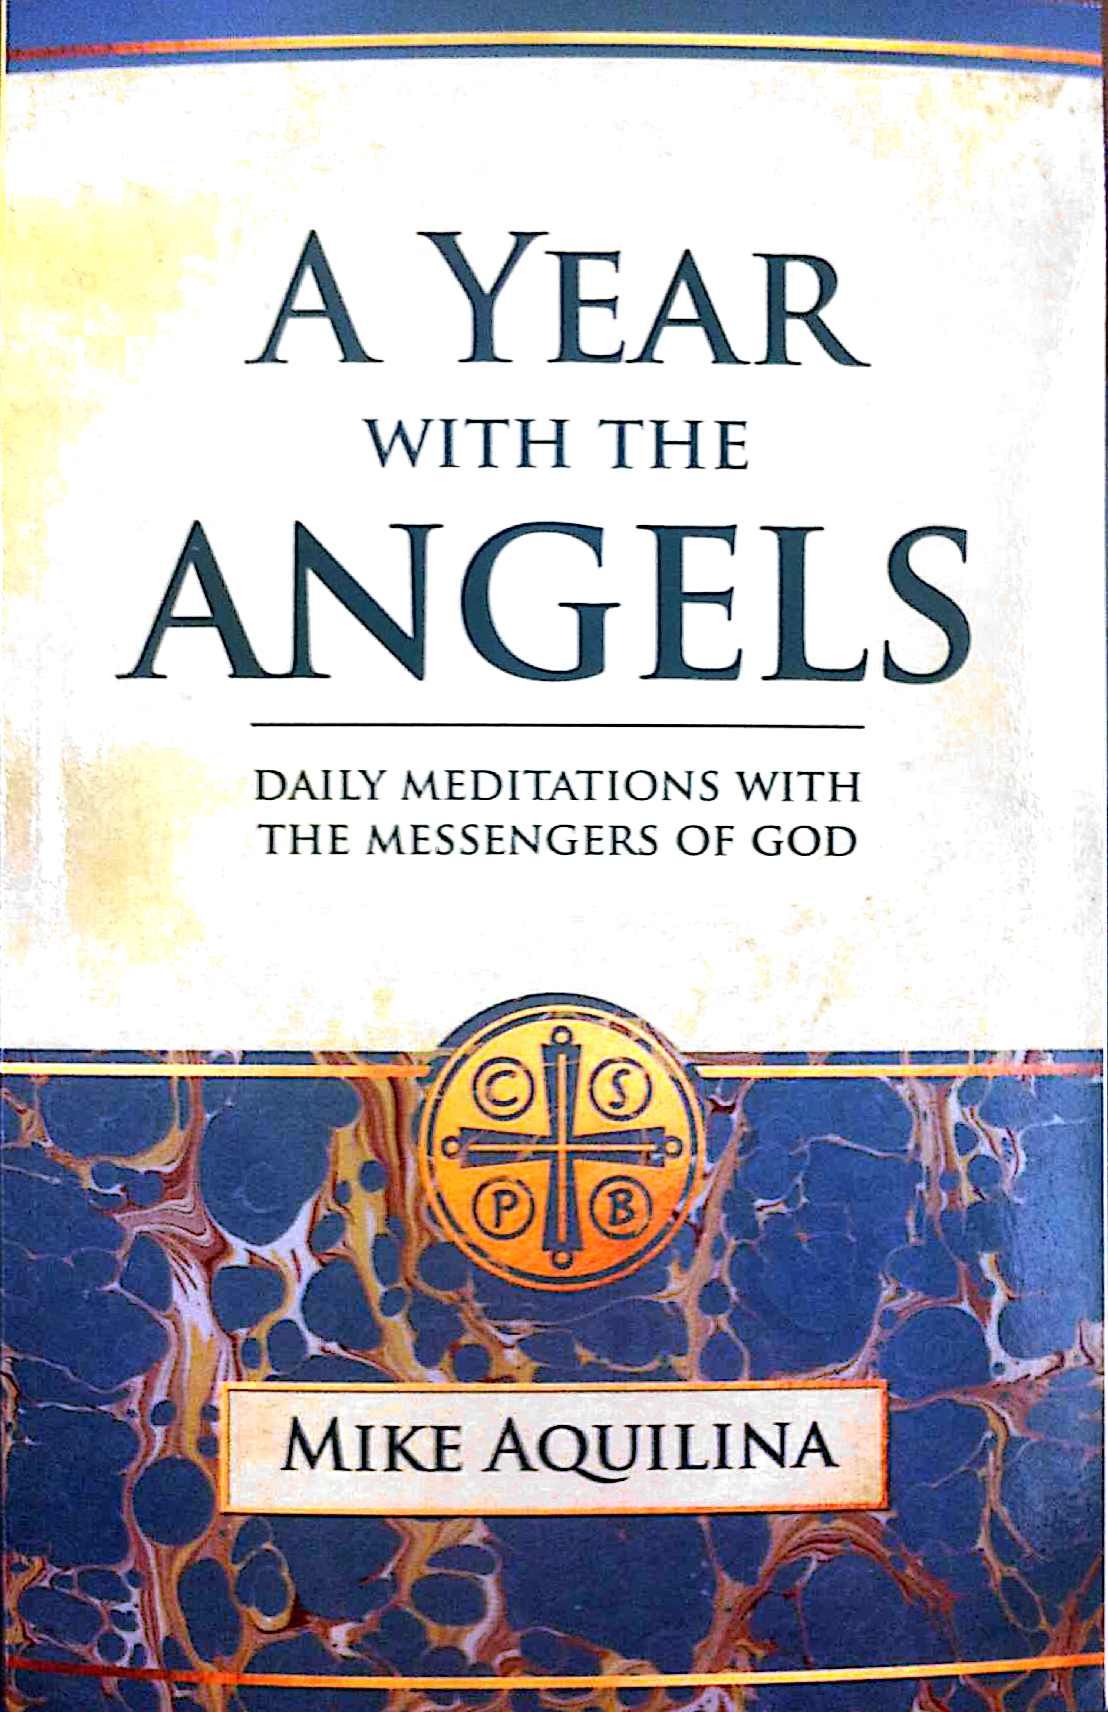 A Year With The Angels: Daily Meditations with the Messengers of God / Mike Aquilina